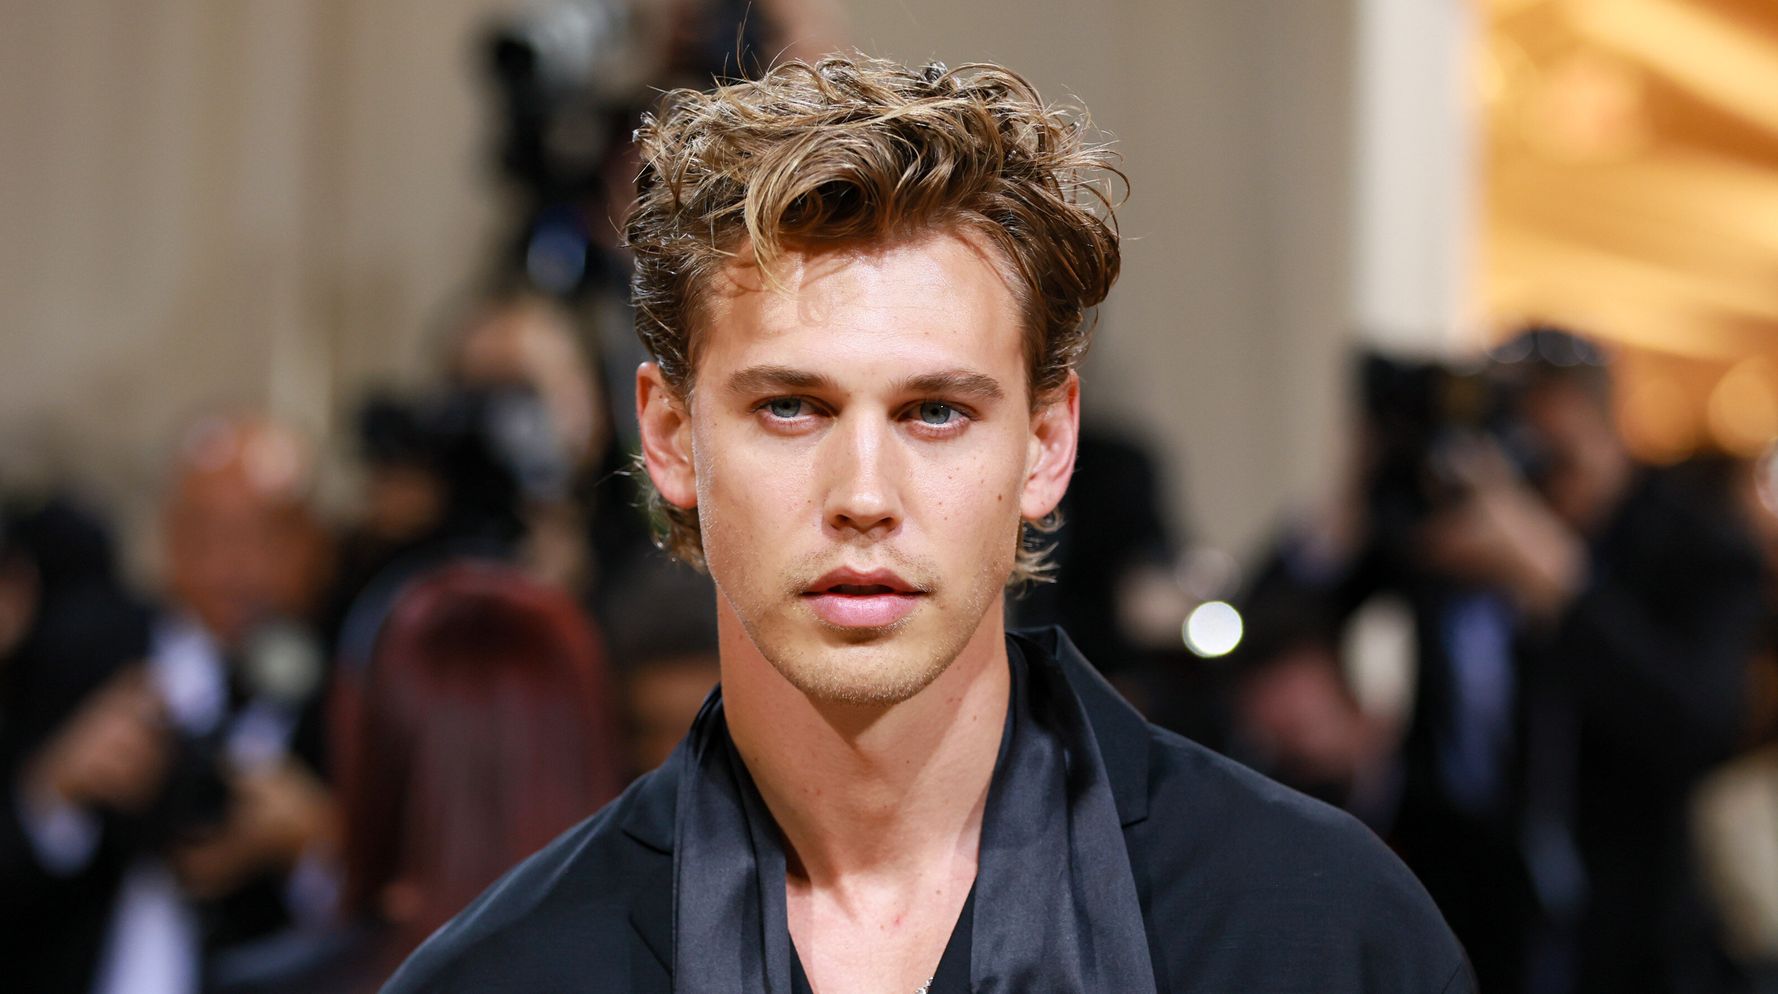 Elvis actor austin butler revives the charm of traditional tailoring on the red carpet